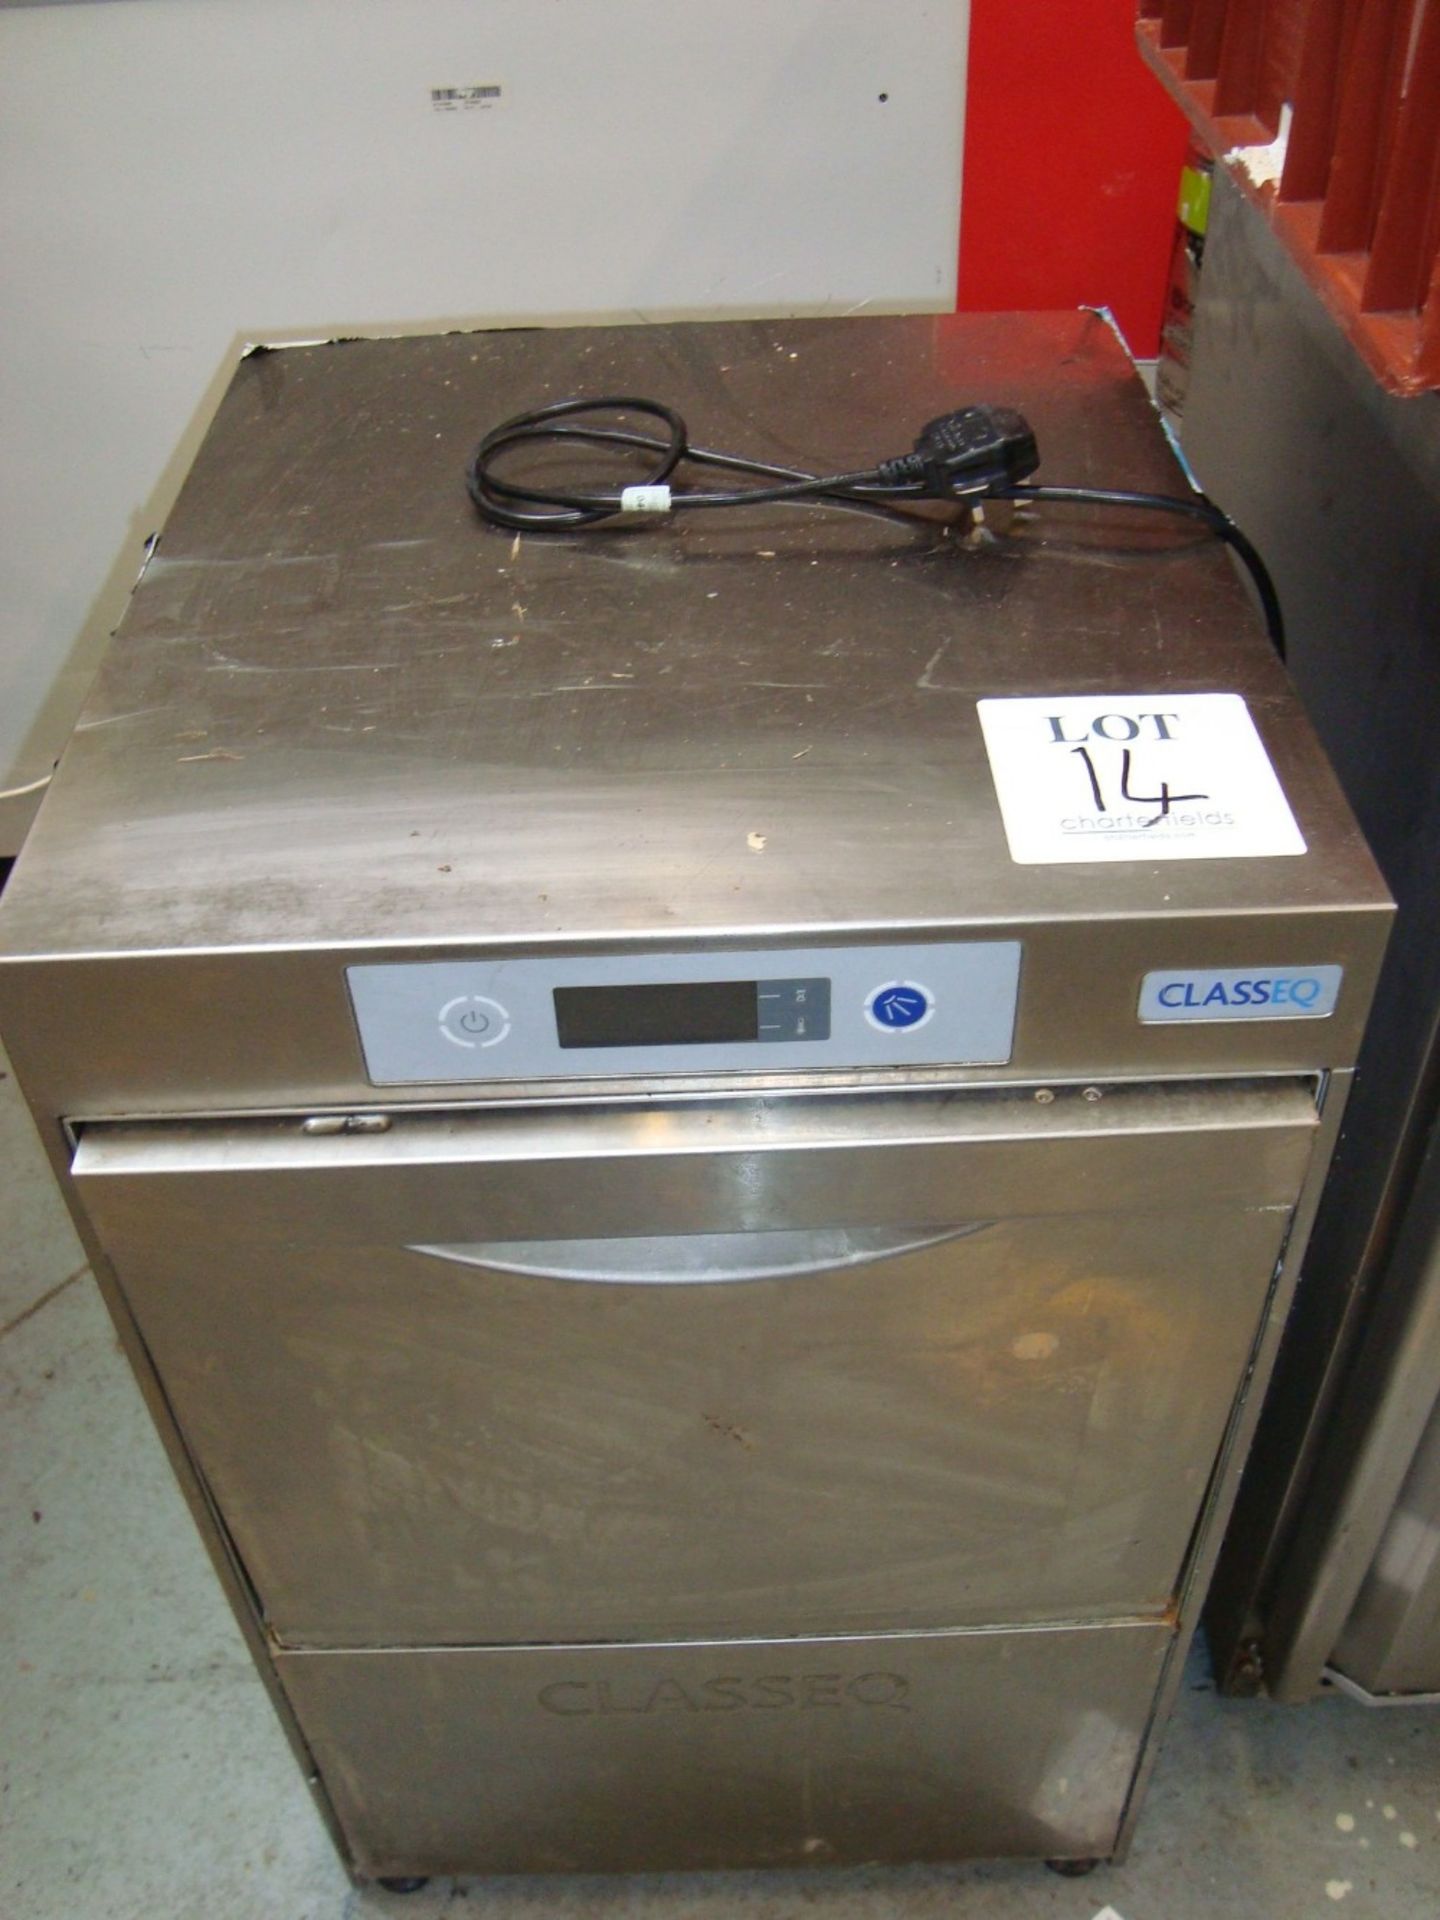 A Class Eq stainless steel under counter glass washing machine